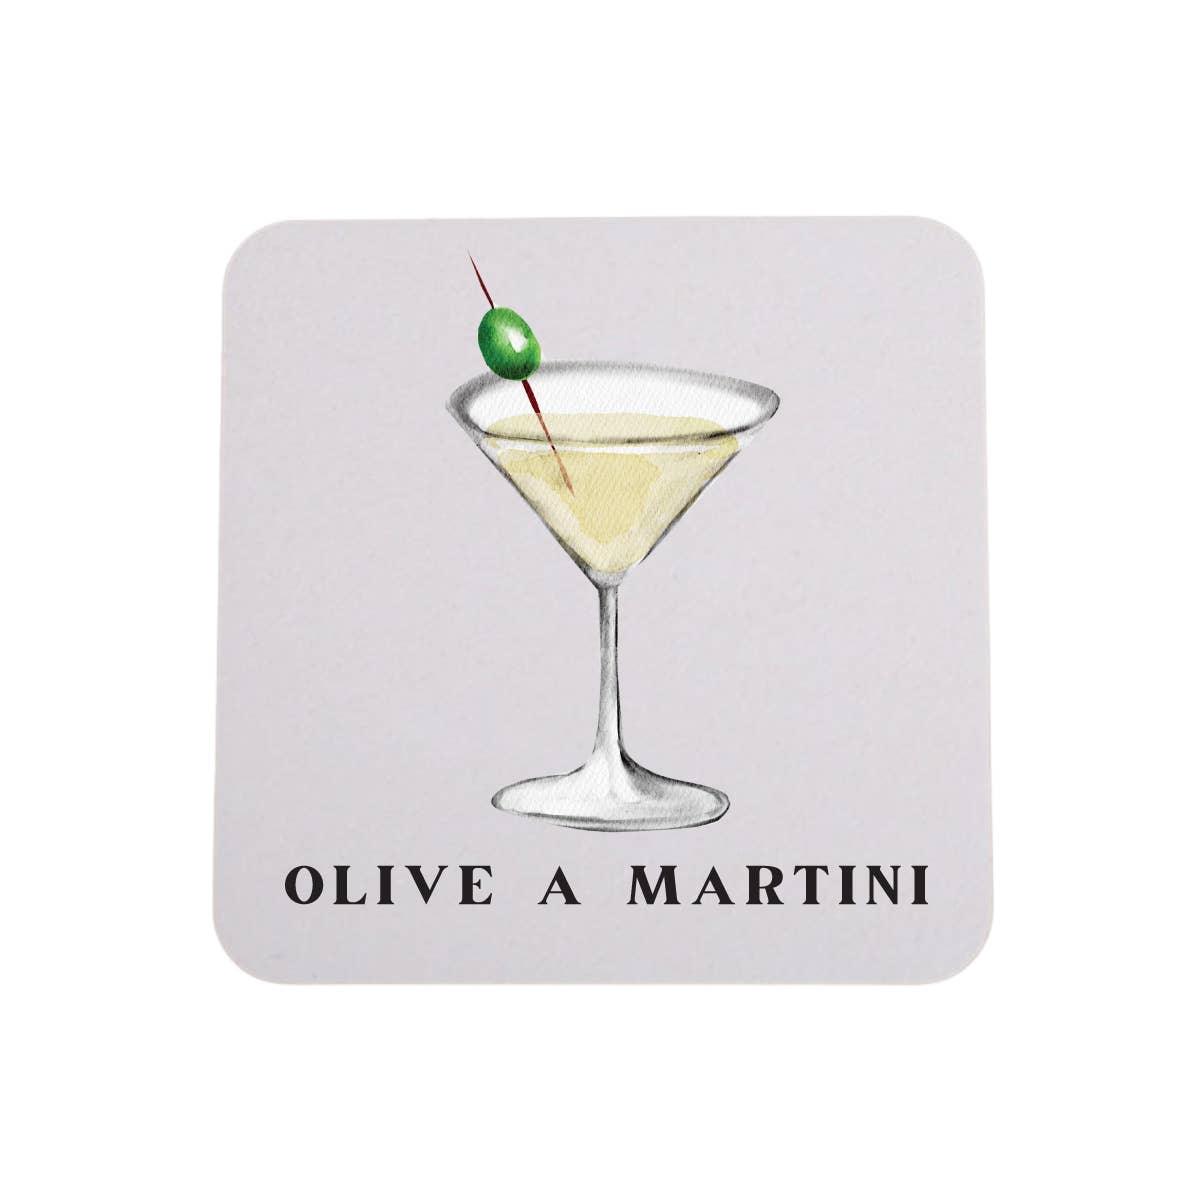 Sip Hip Hooray - Olive A Martini - 4 Pack Cheeky Party Bar Coasters Unique